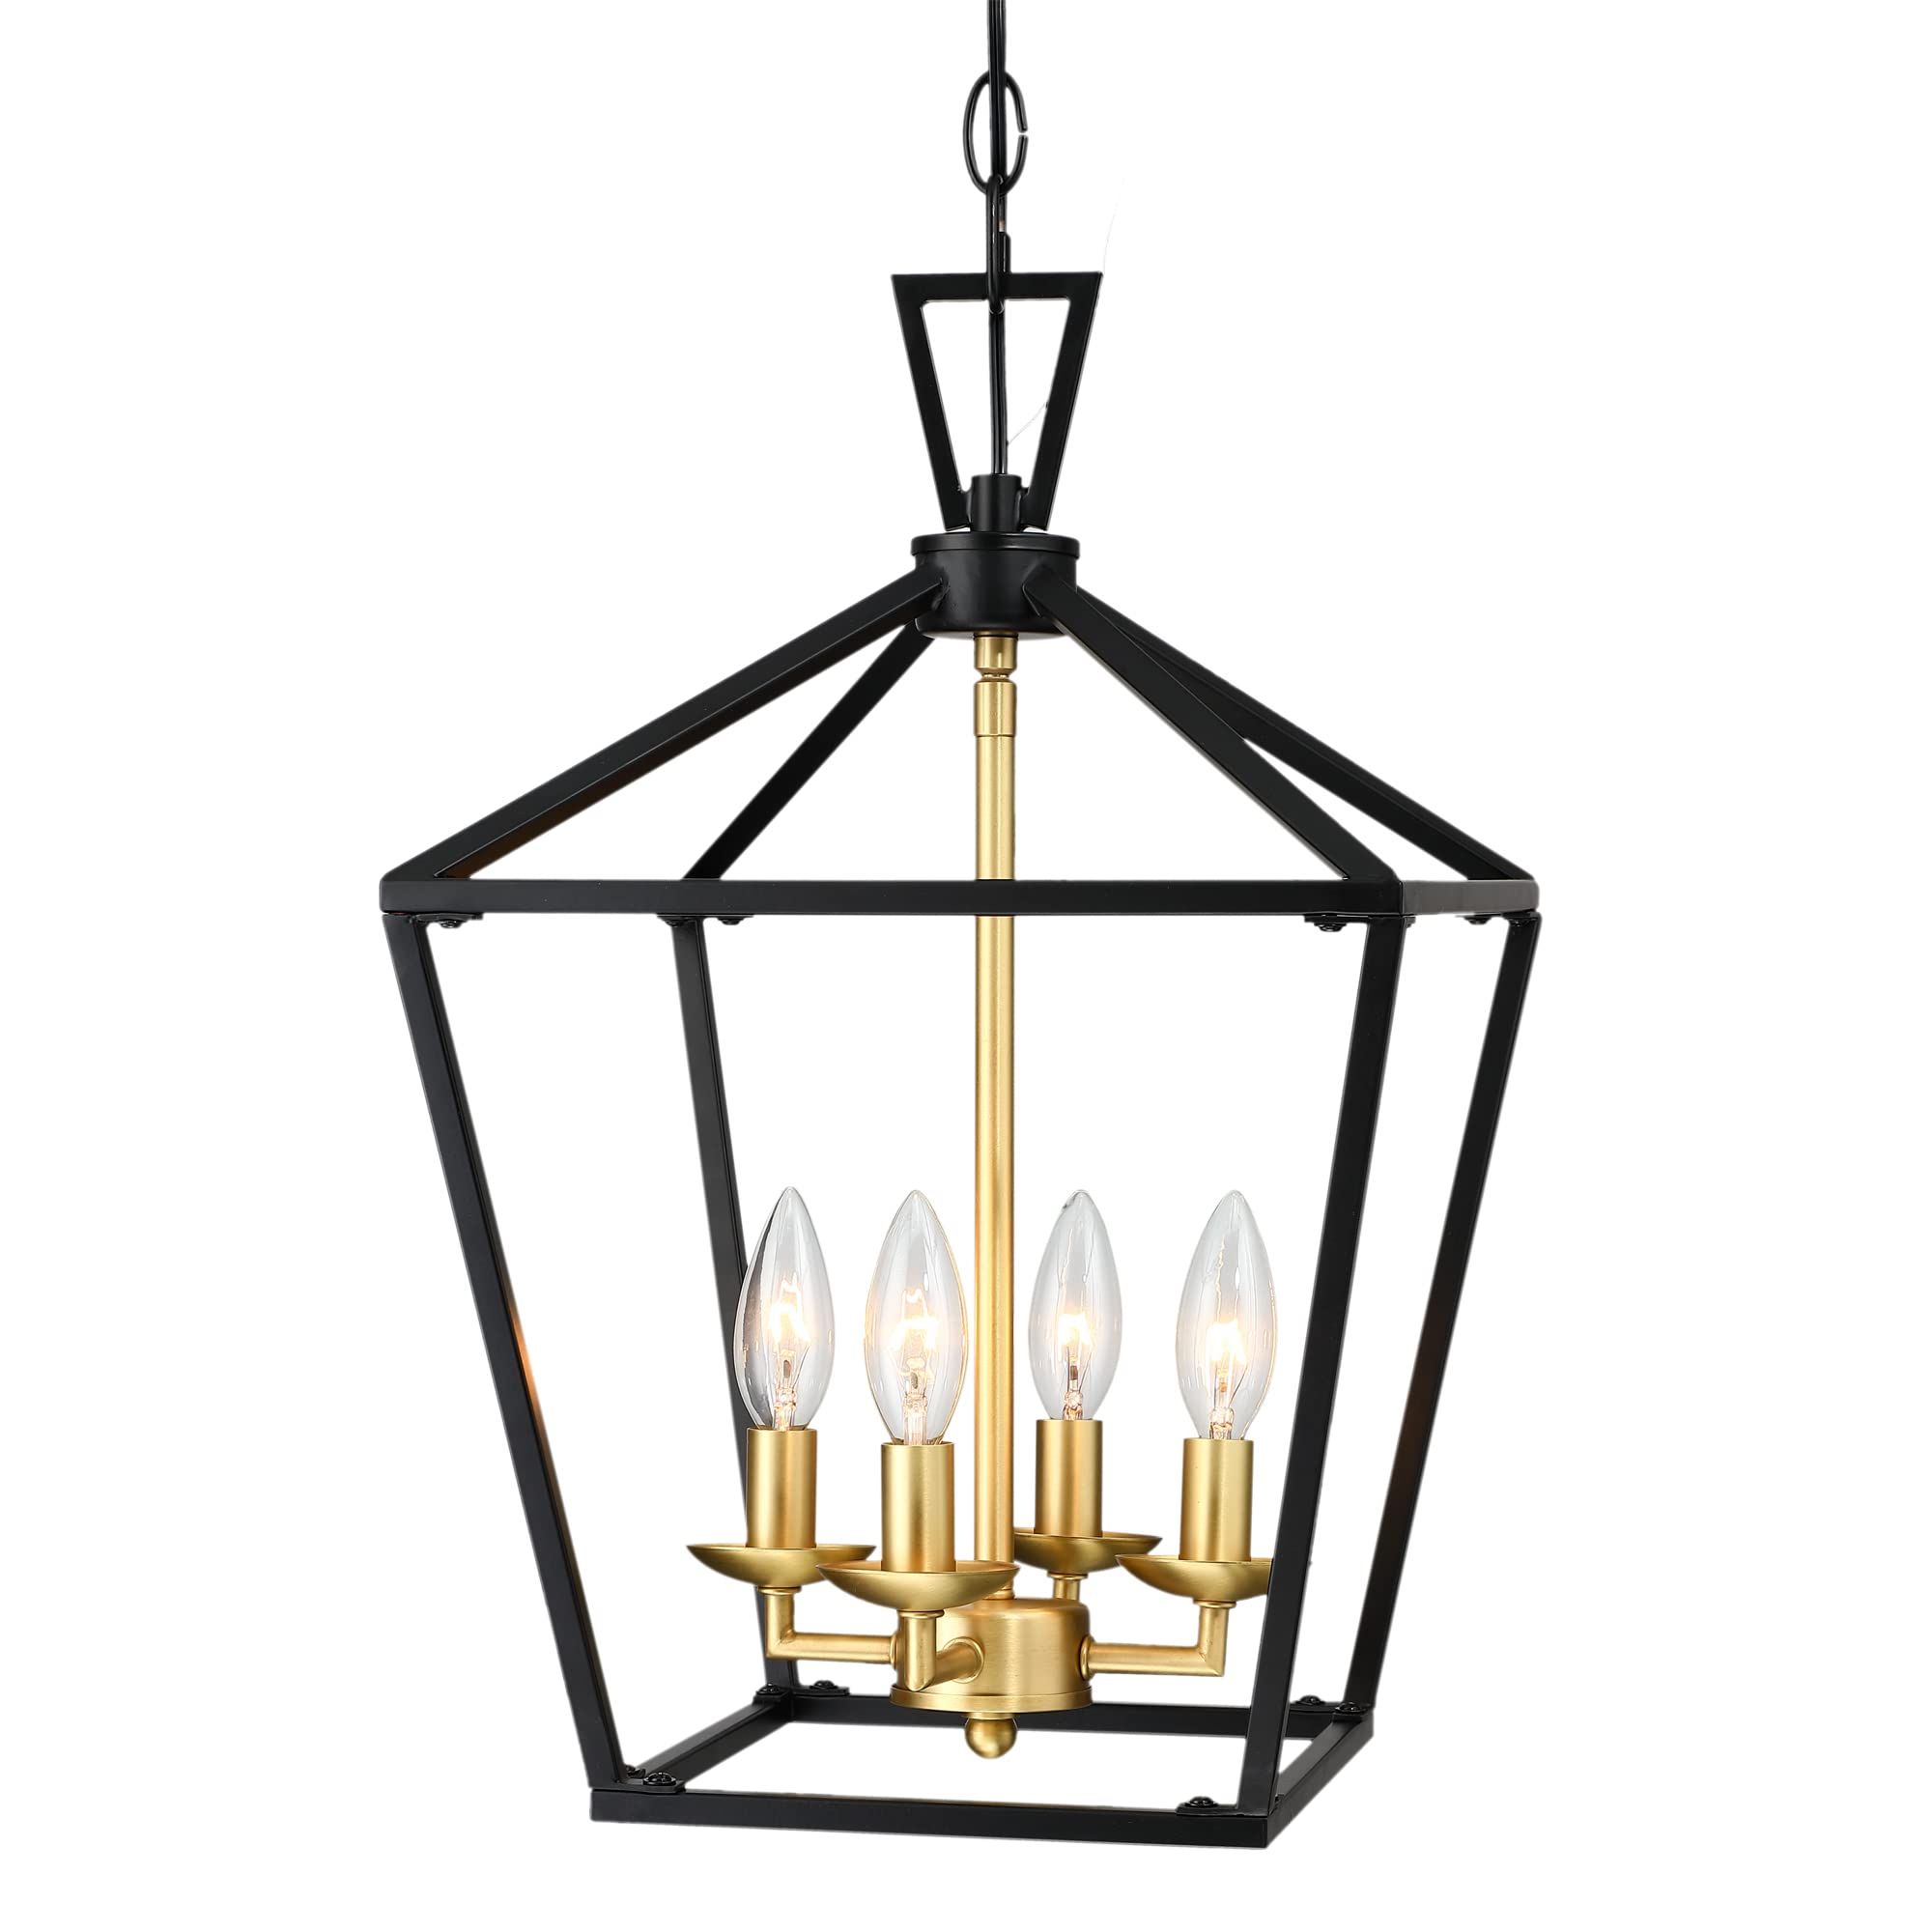 2019 Adjustable Lantern Chandeliers Throughout Untrammelife 4 Light Lantern Pendant Light Black And Gold Brushed Brass  Kitchen Pendant Light Modern Geometric Chandelier Adjustable Chain Cage  Hanging Pendant Light Fixture For Foyer Dining Room – – Amazon (View 2 of 15)